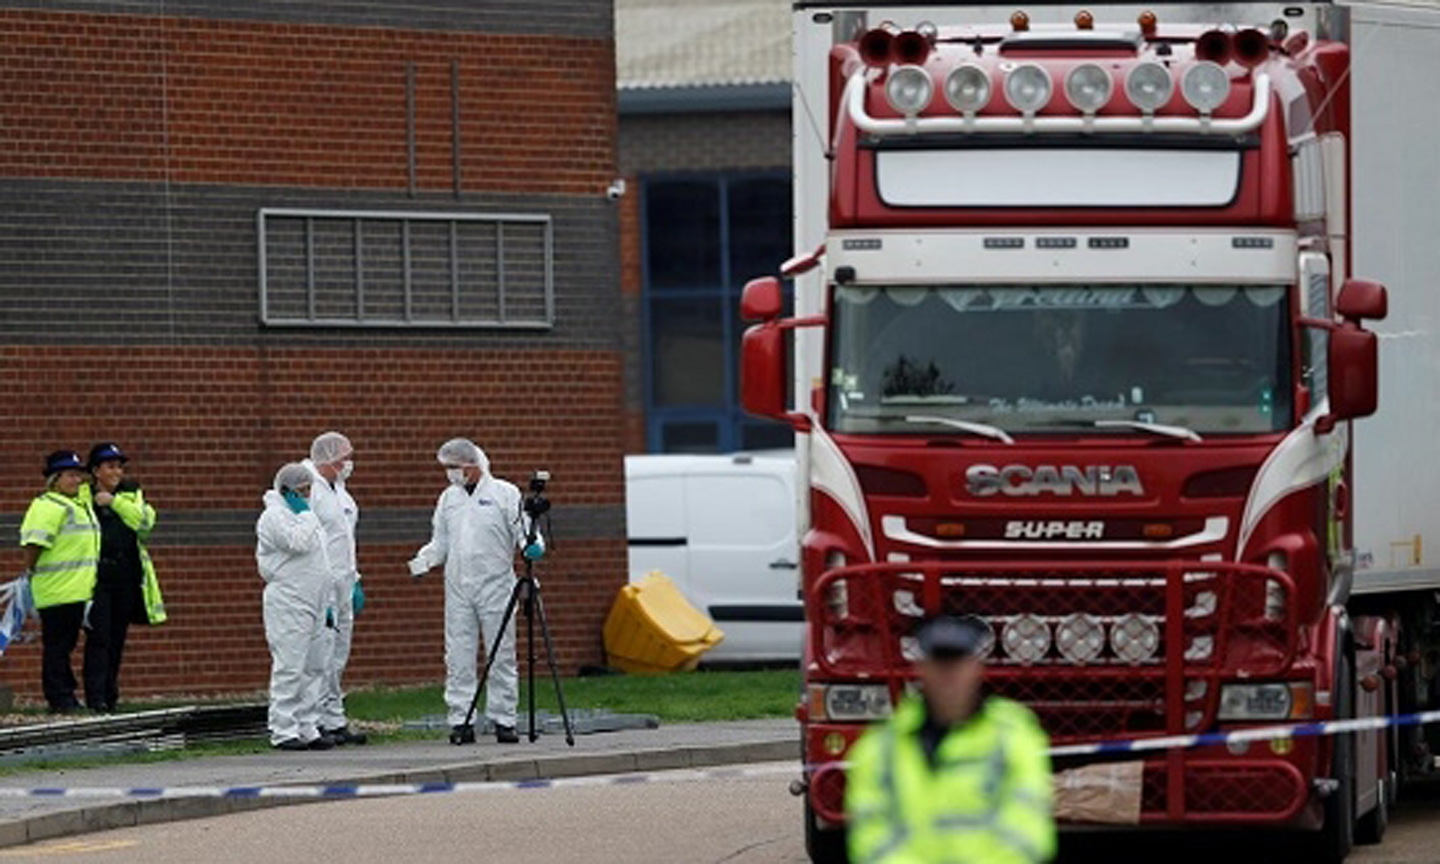 Police are seen at the scene where bodies were discovered in a lorry container, in Grays, Essex, Britain October 23, 2019. (Photo: Reuters)